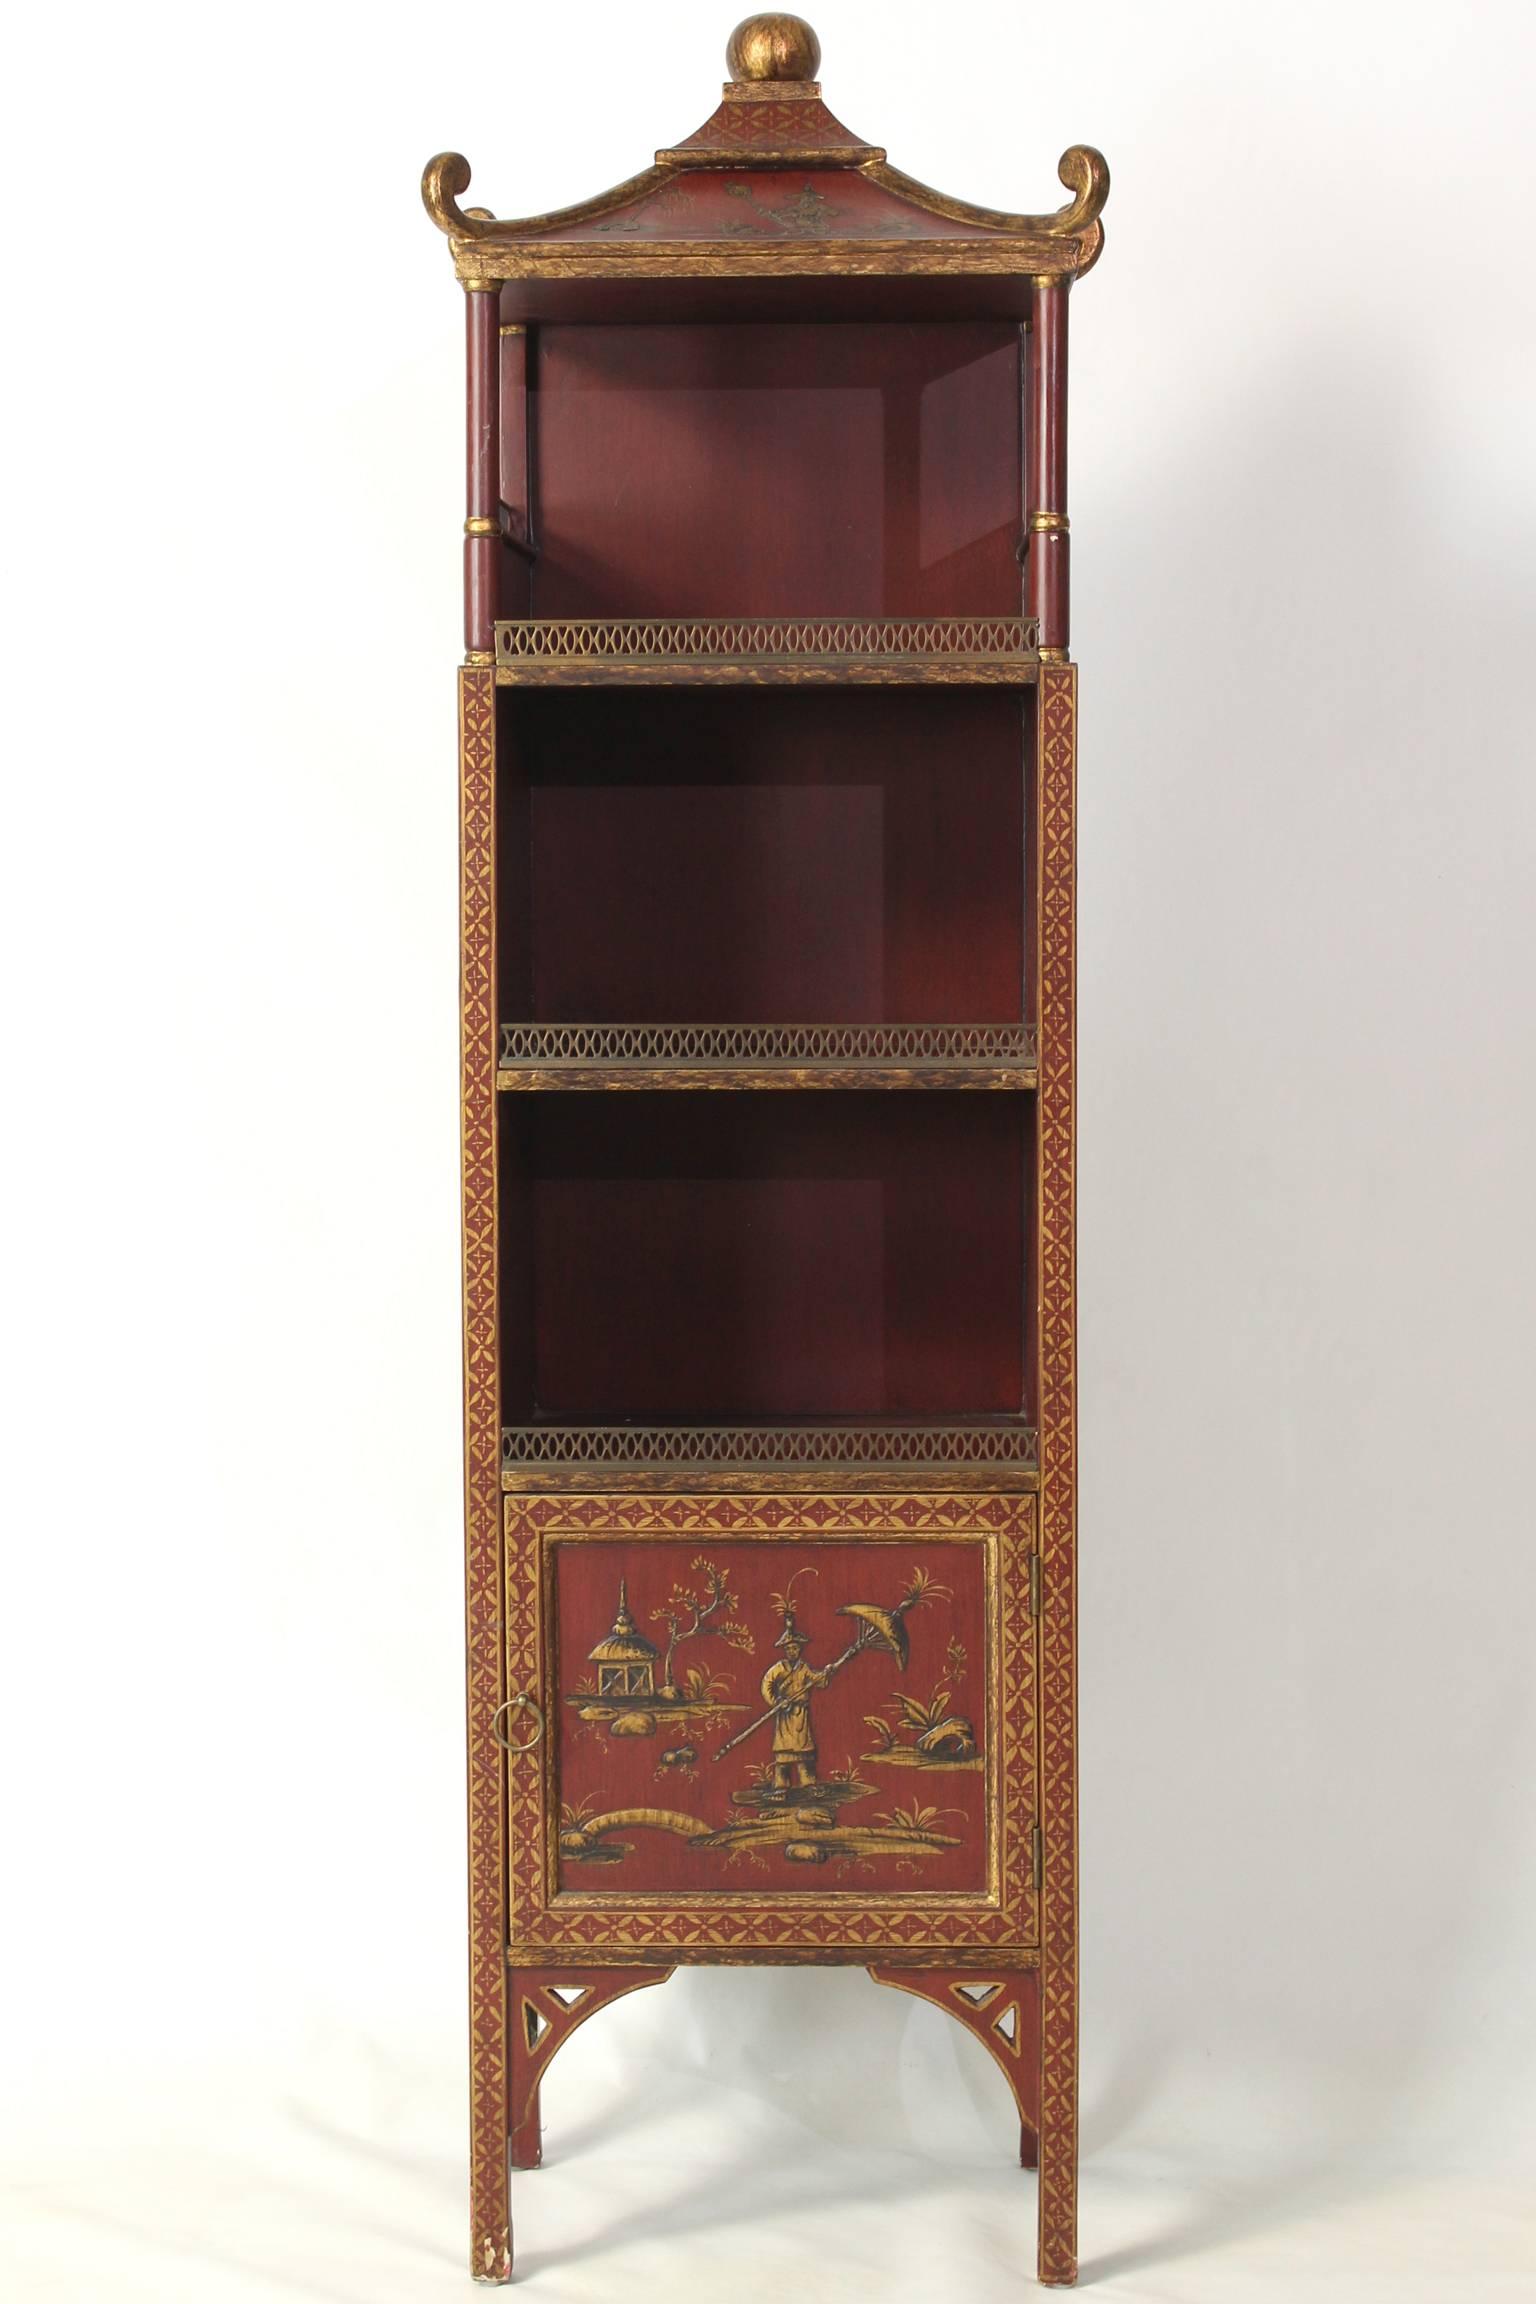 A small and charming scarlet and gilt decorated chinoiserie, pagoda style bookcase with three open shelves and one small cupboard at the bottom of the piece.